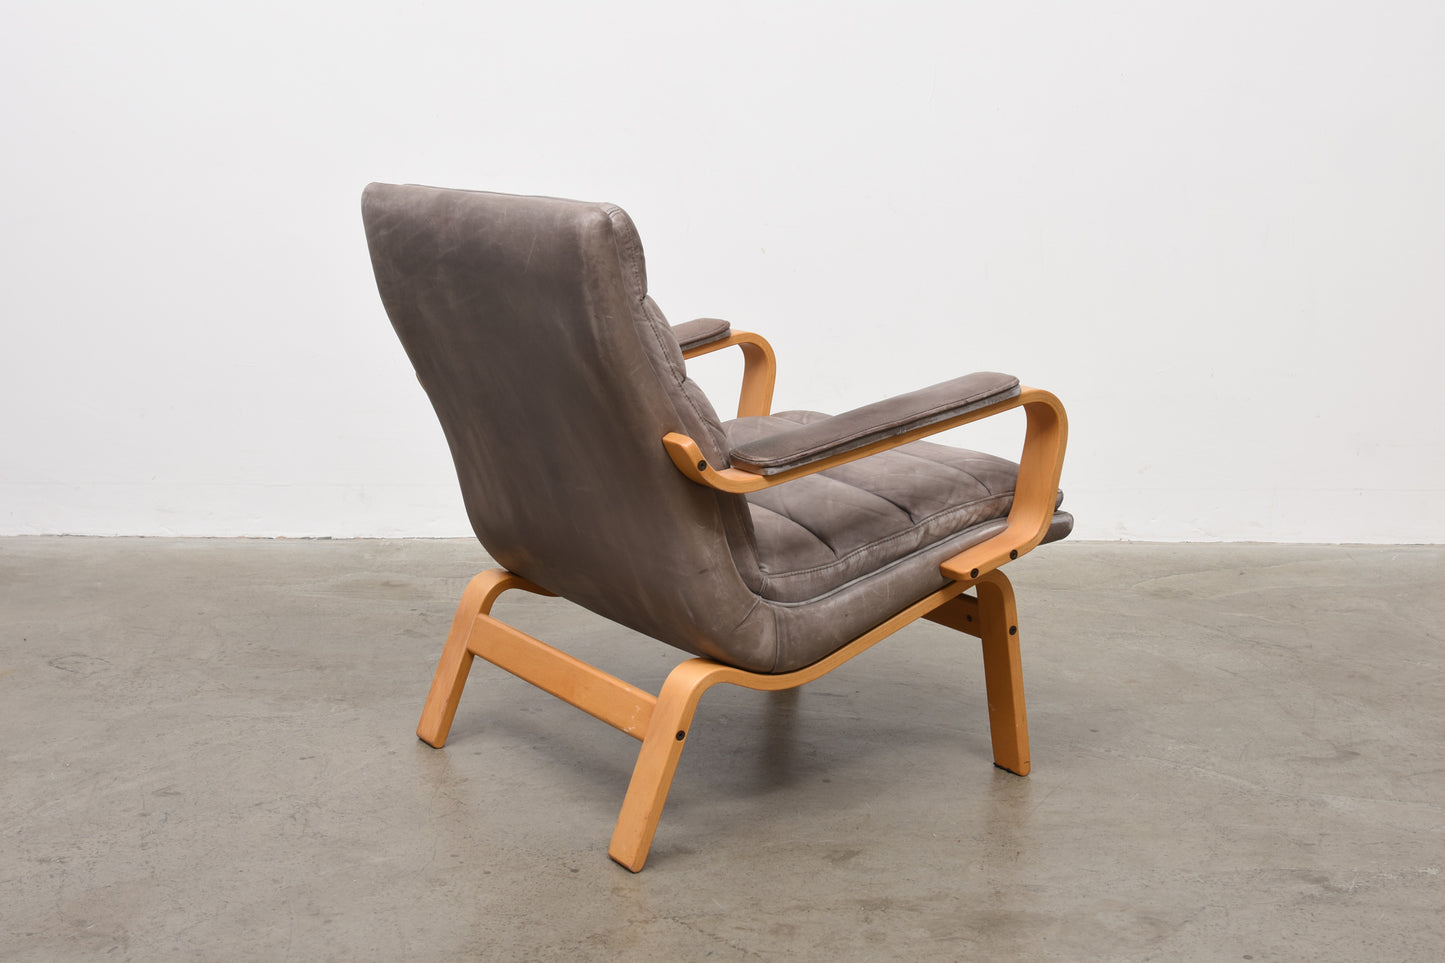 1980s beech + leather lounger